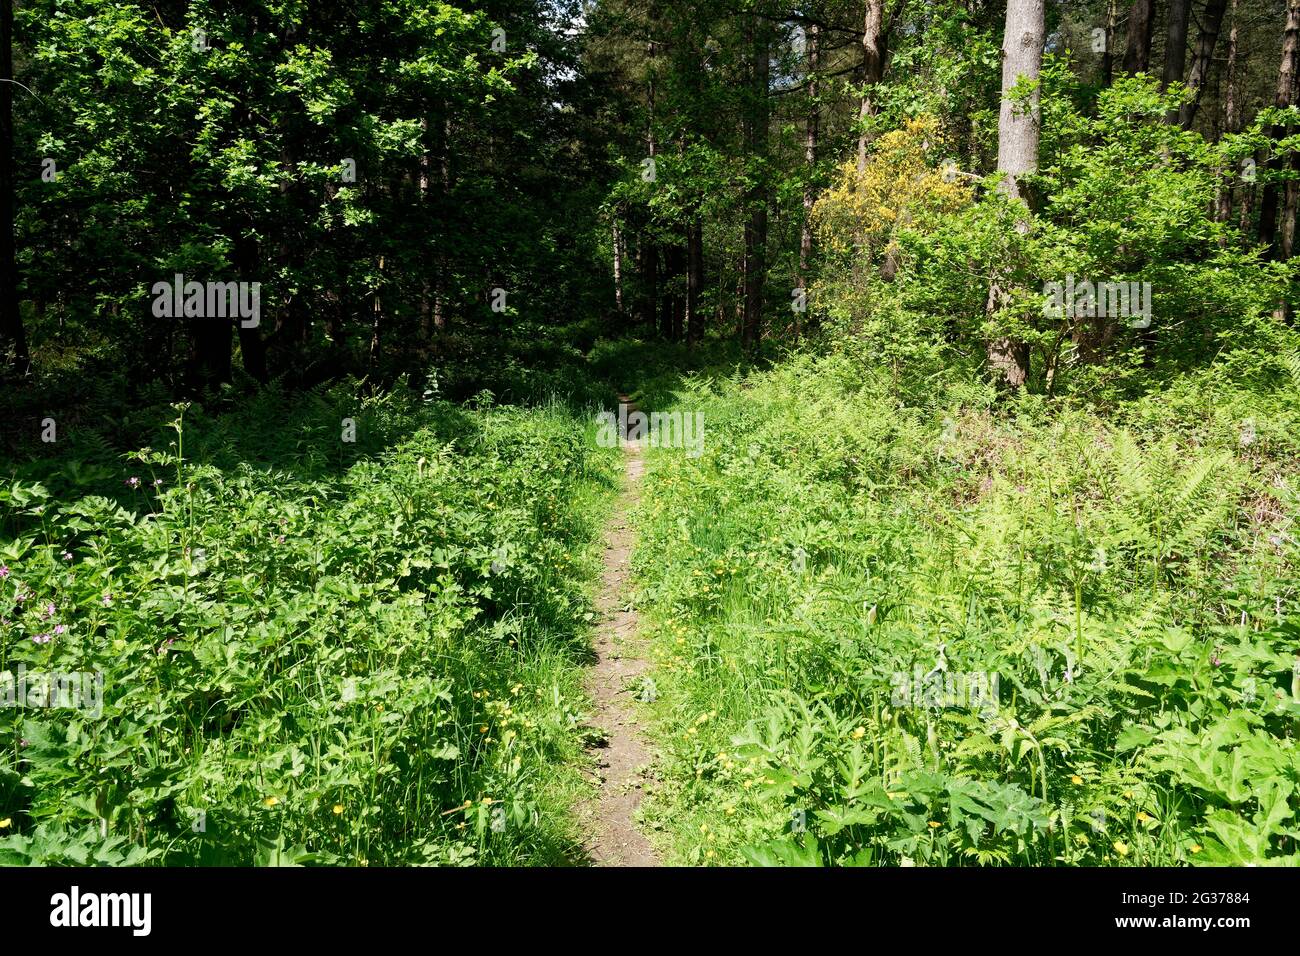 Narrow, overgrown footpath in bright sunlight disappears in to a dark forest in the Derbyshire countryside. Stock Photo